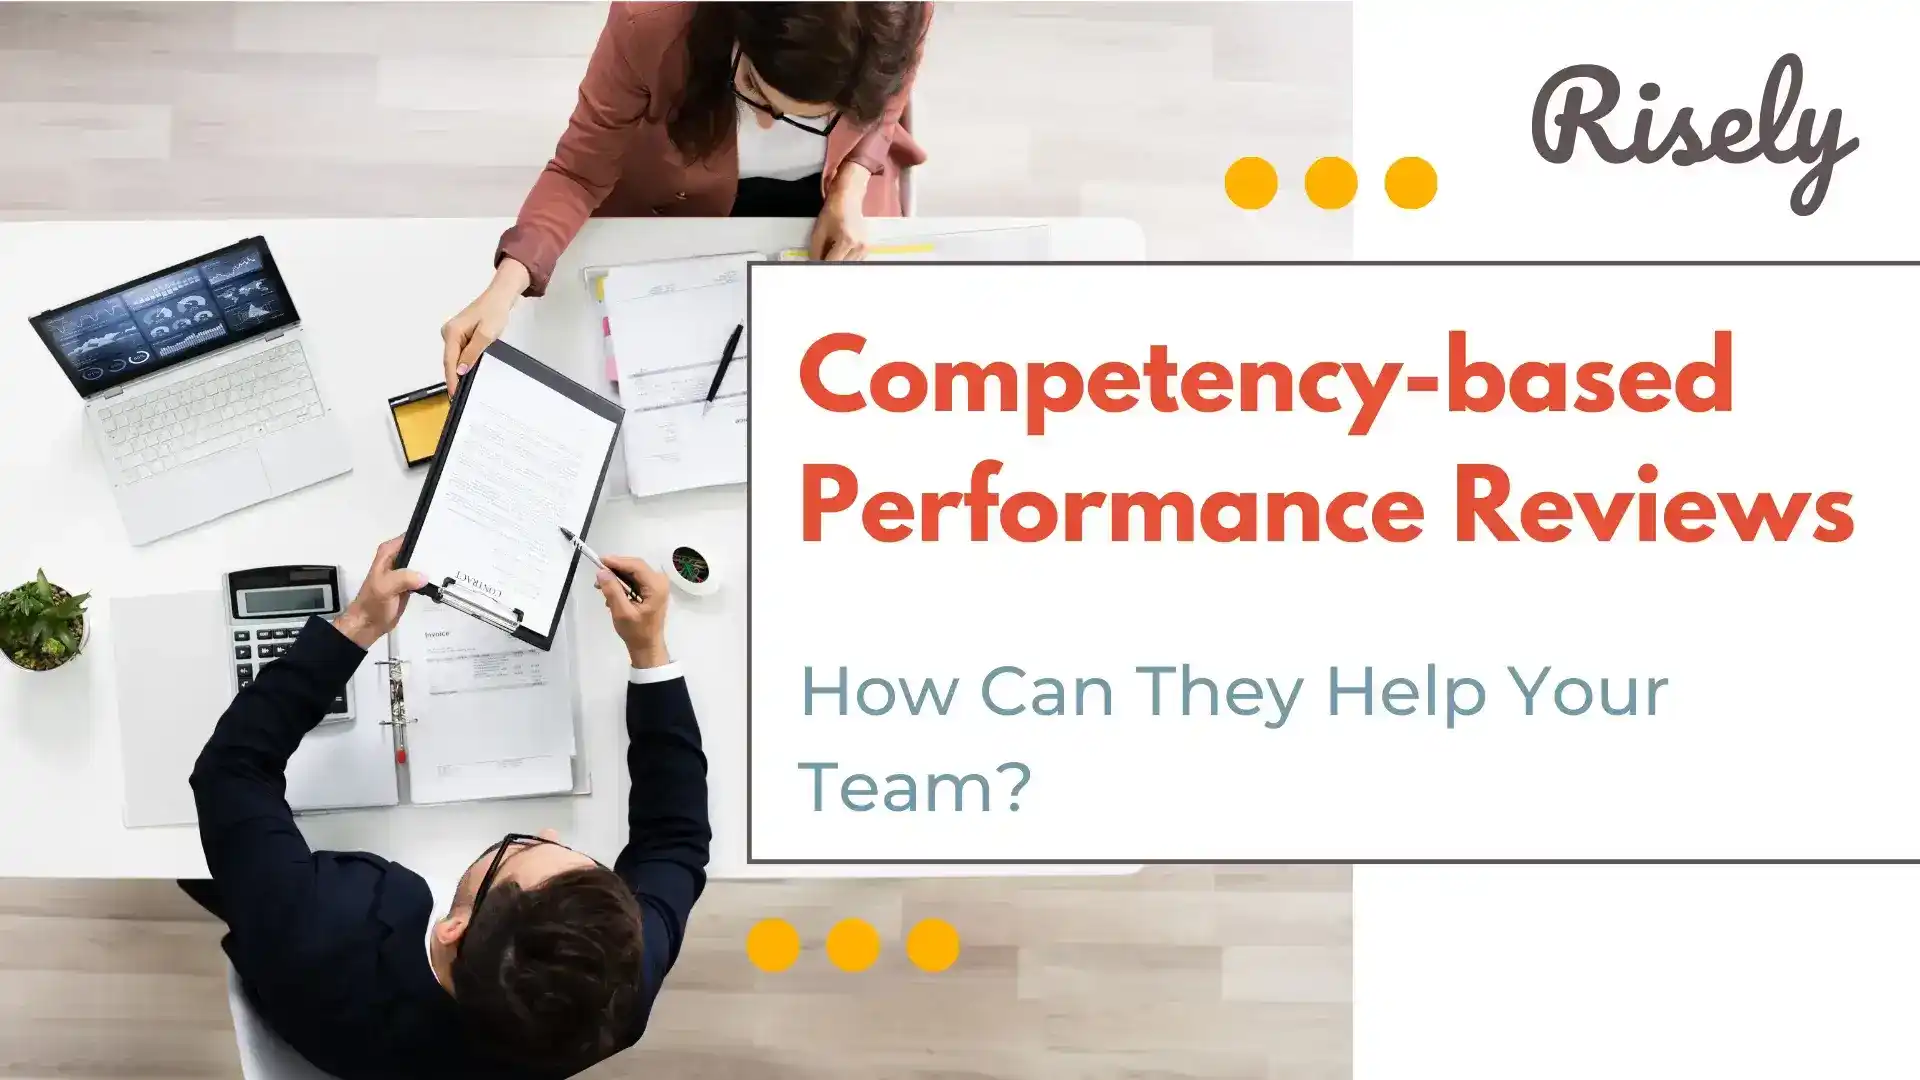 Competency-based Performance Reviews